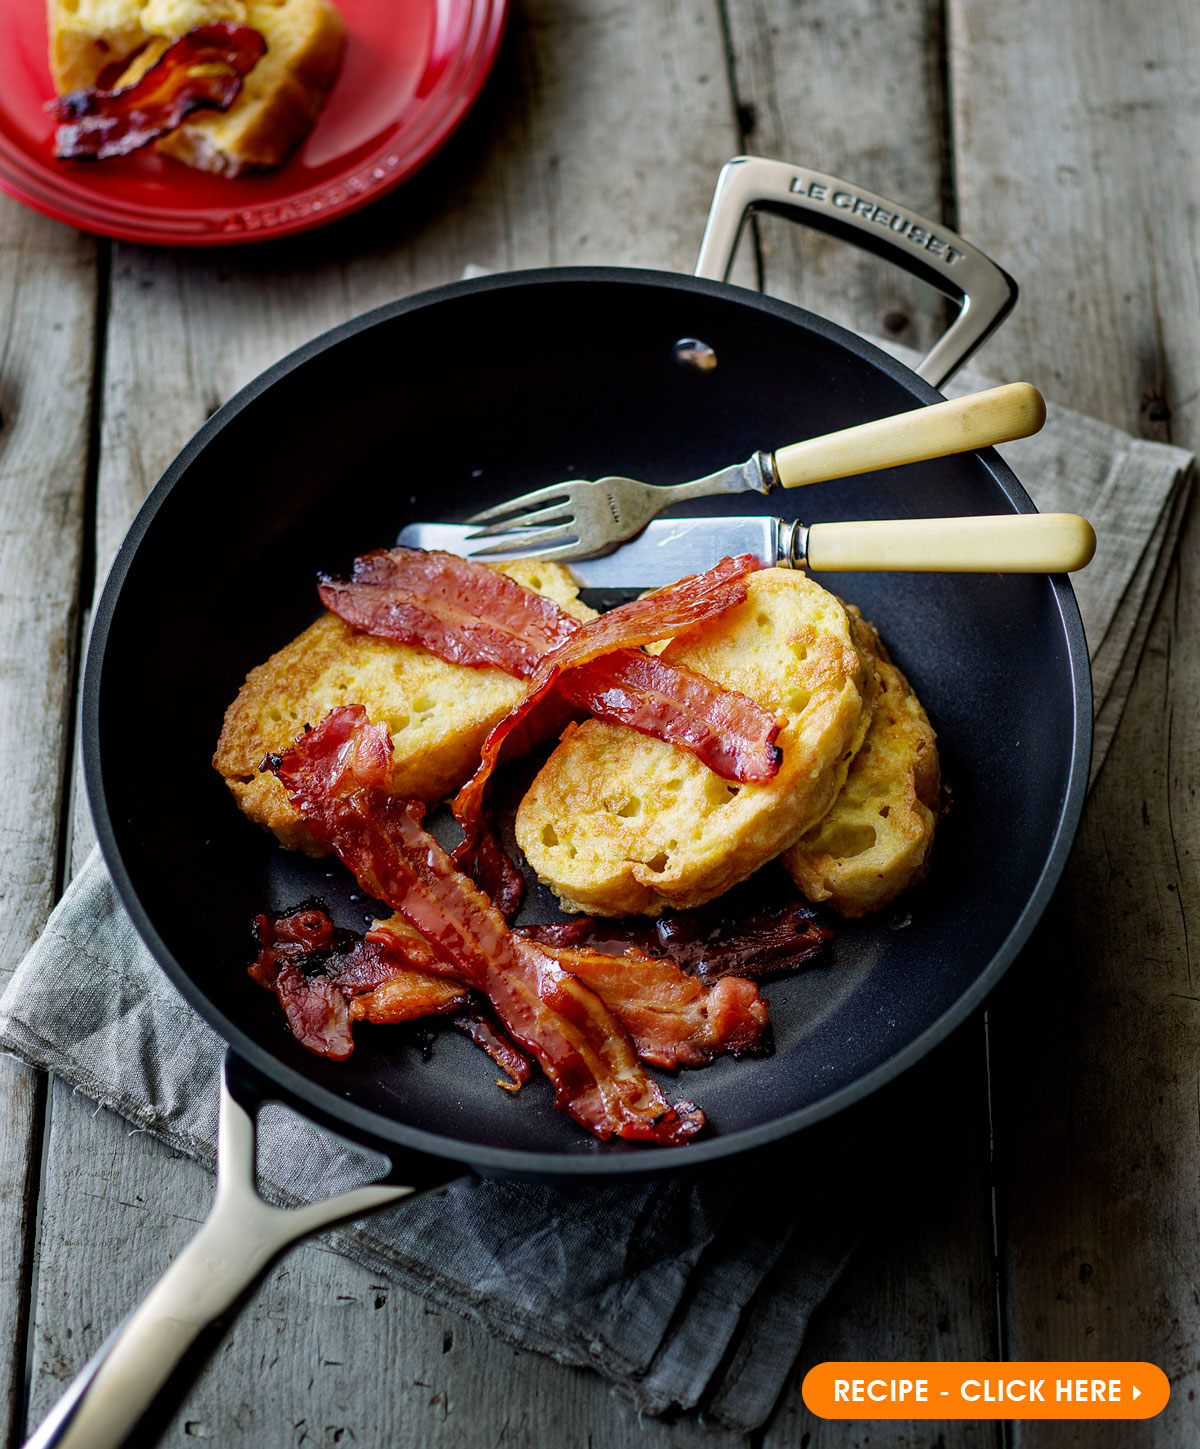 Le Creuset Recipe for Maple Glazed Bacon and French Toats in TNS Frying Pan